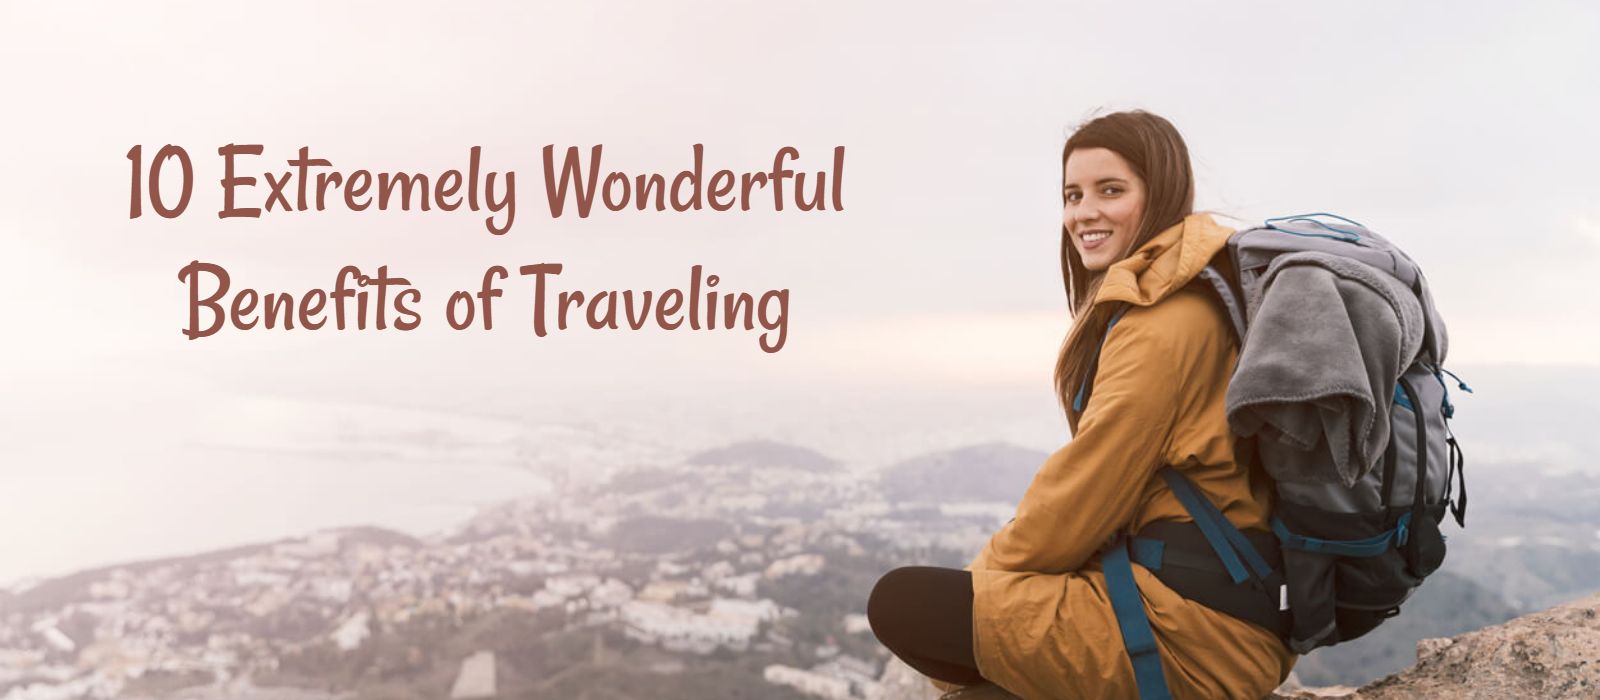 10 Amazing Benefits of Traveling the World - The List Directory